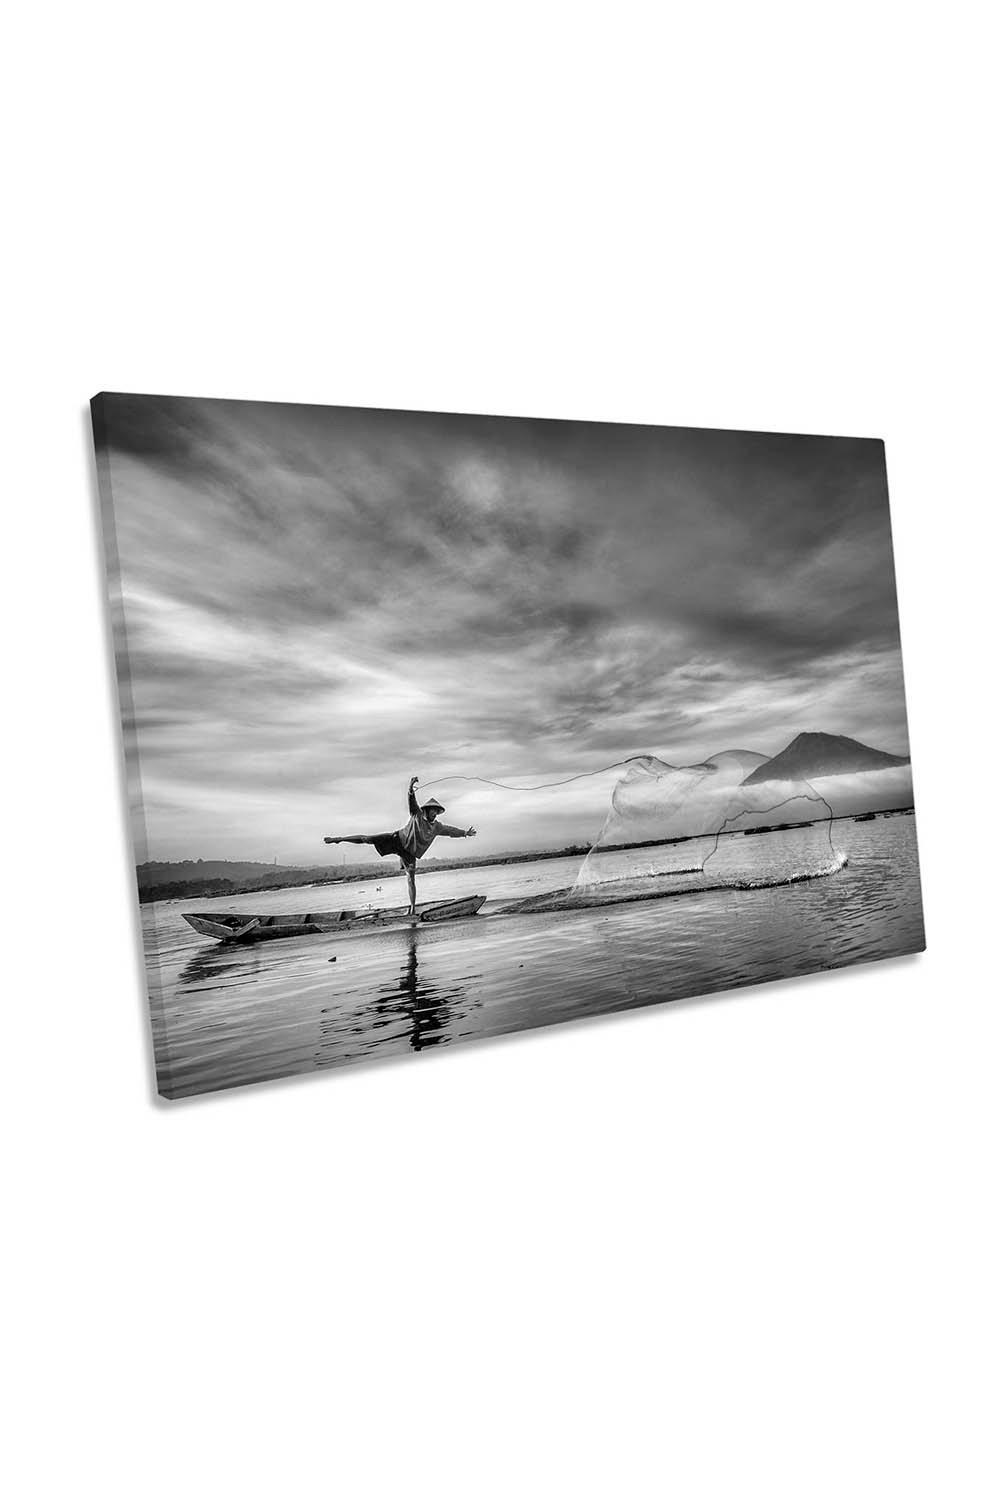 Man Behind the Fishing Net Canvas Wall Art Picture Print